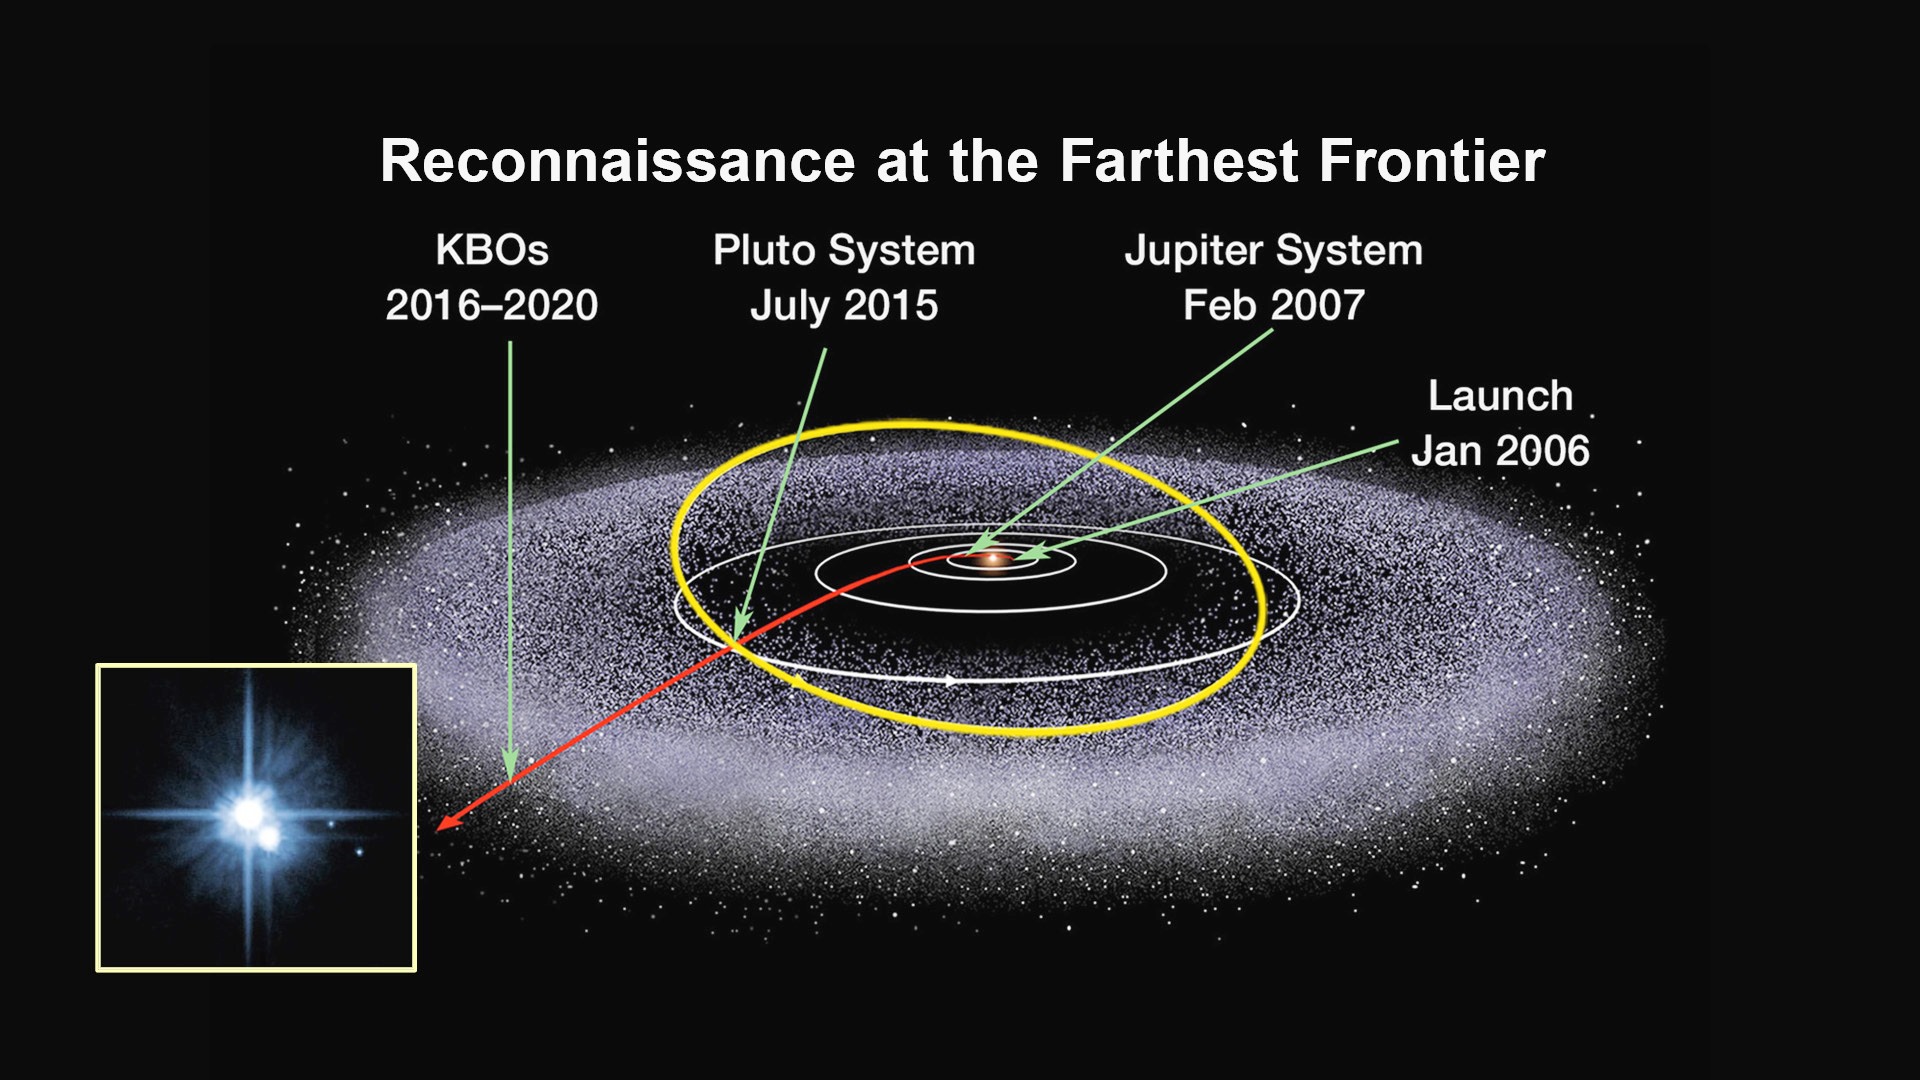 how was the planet pluto discovered and how long did it take astronomers to discover pluto after neptune